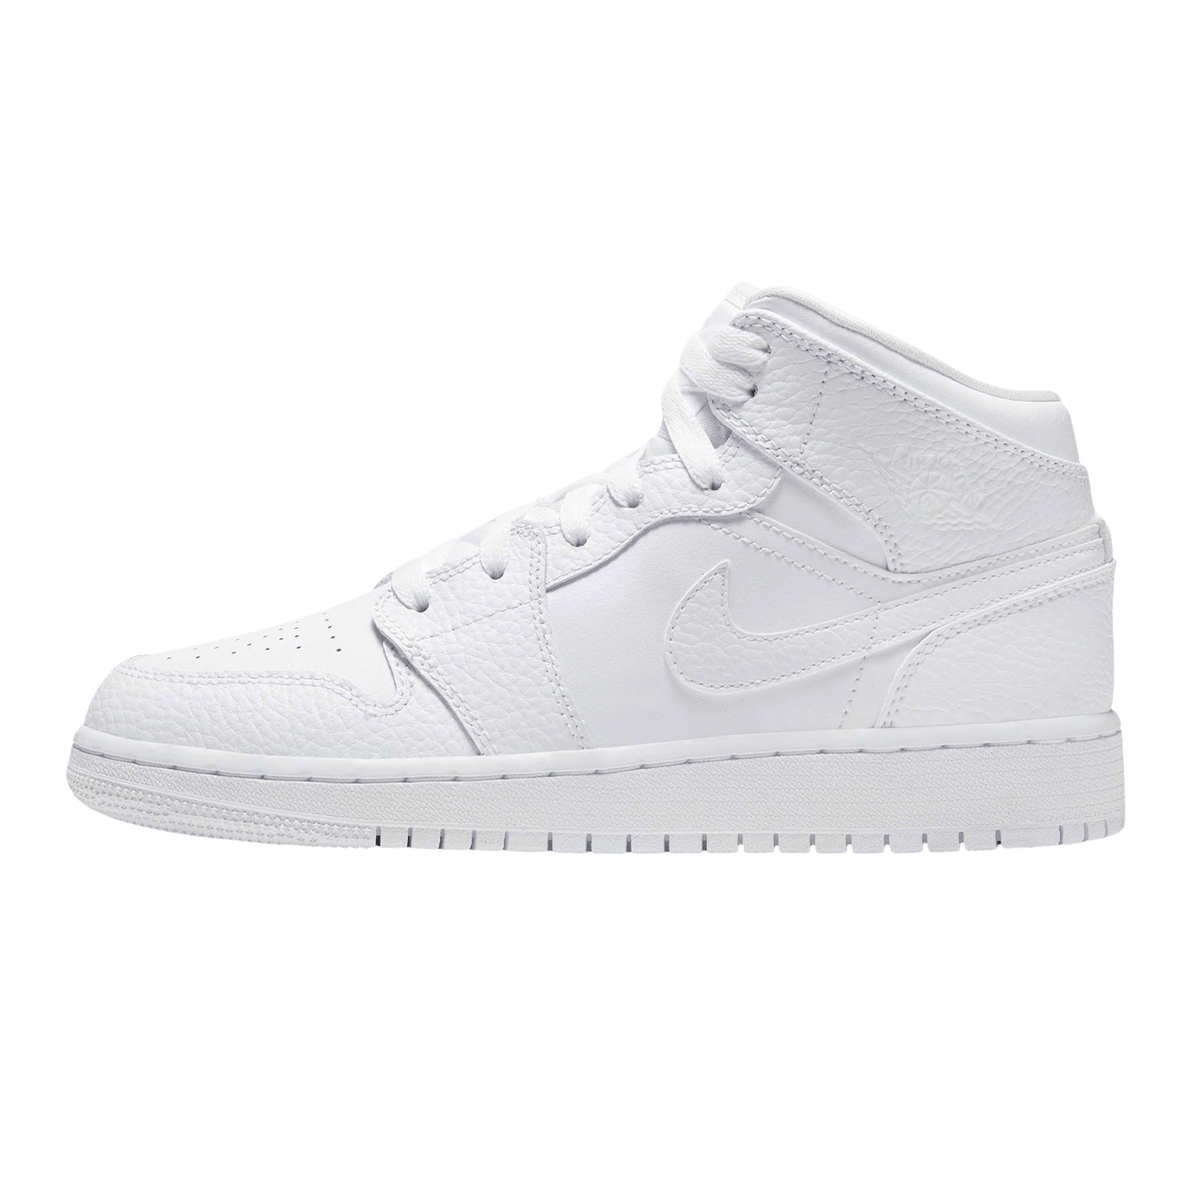 nike air baseline low price philippines shoes Mid GS 'Triple White' - JuzsportsShops